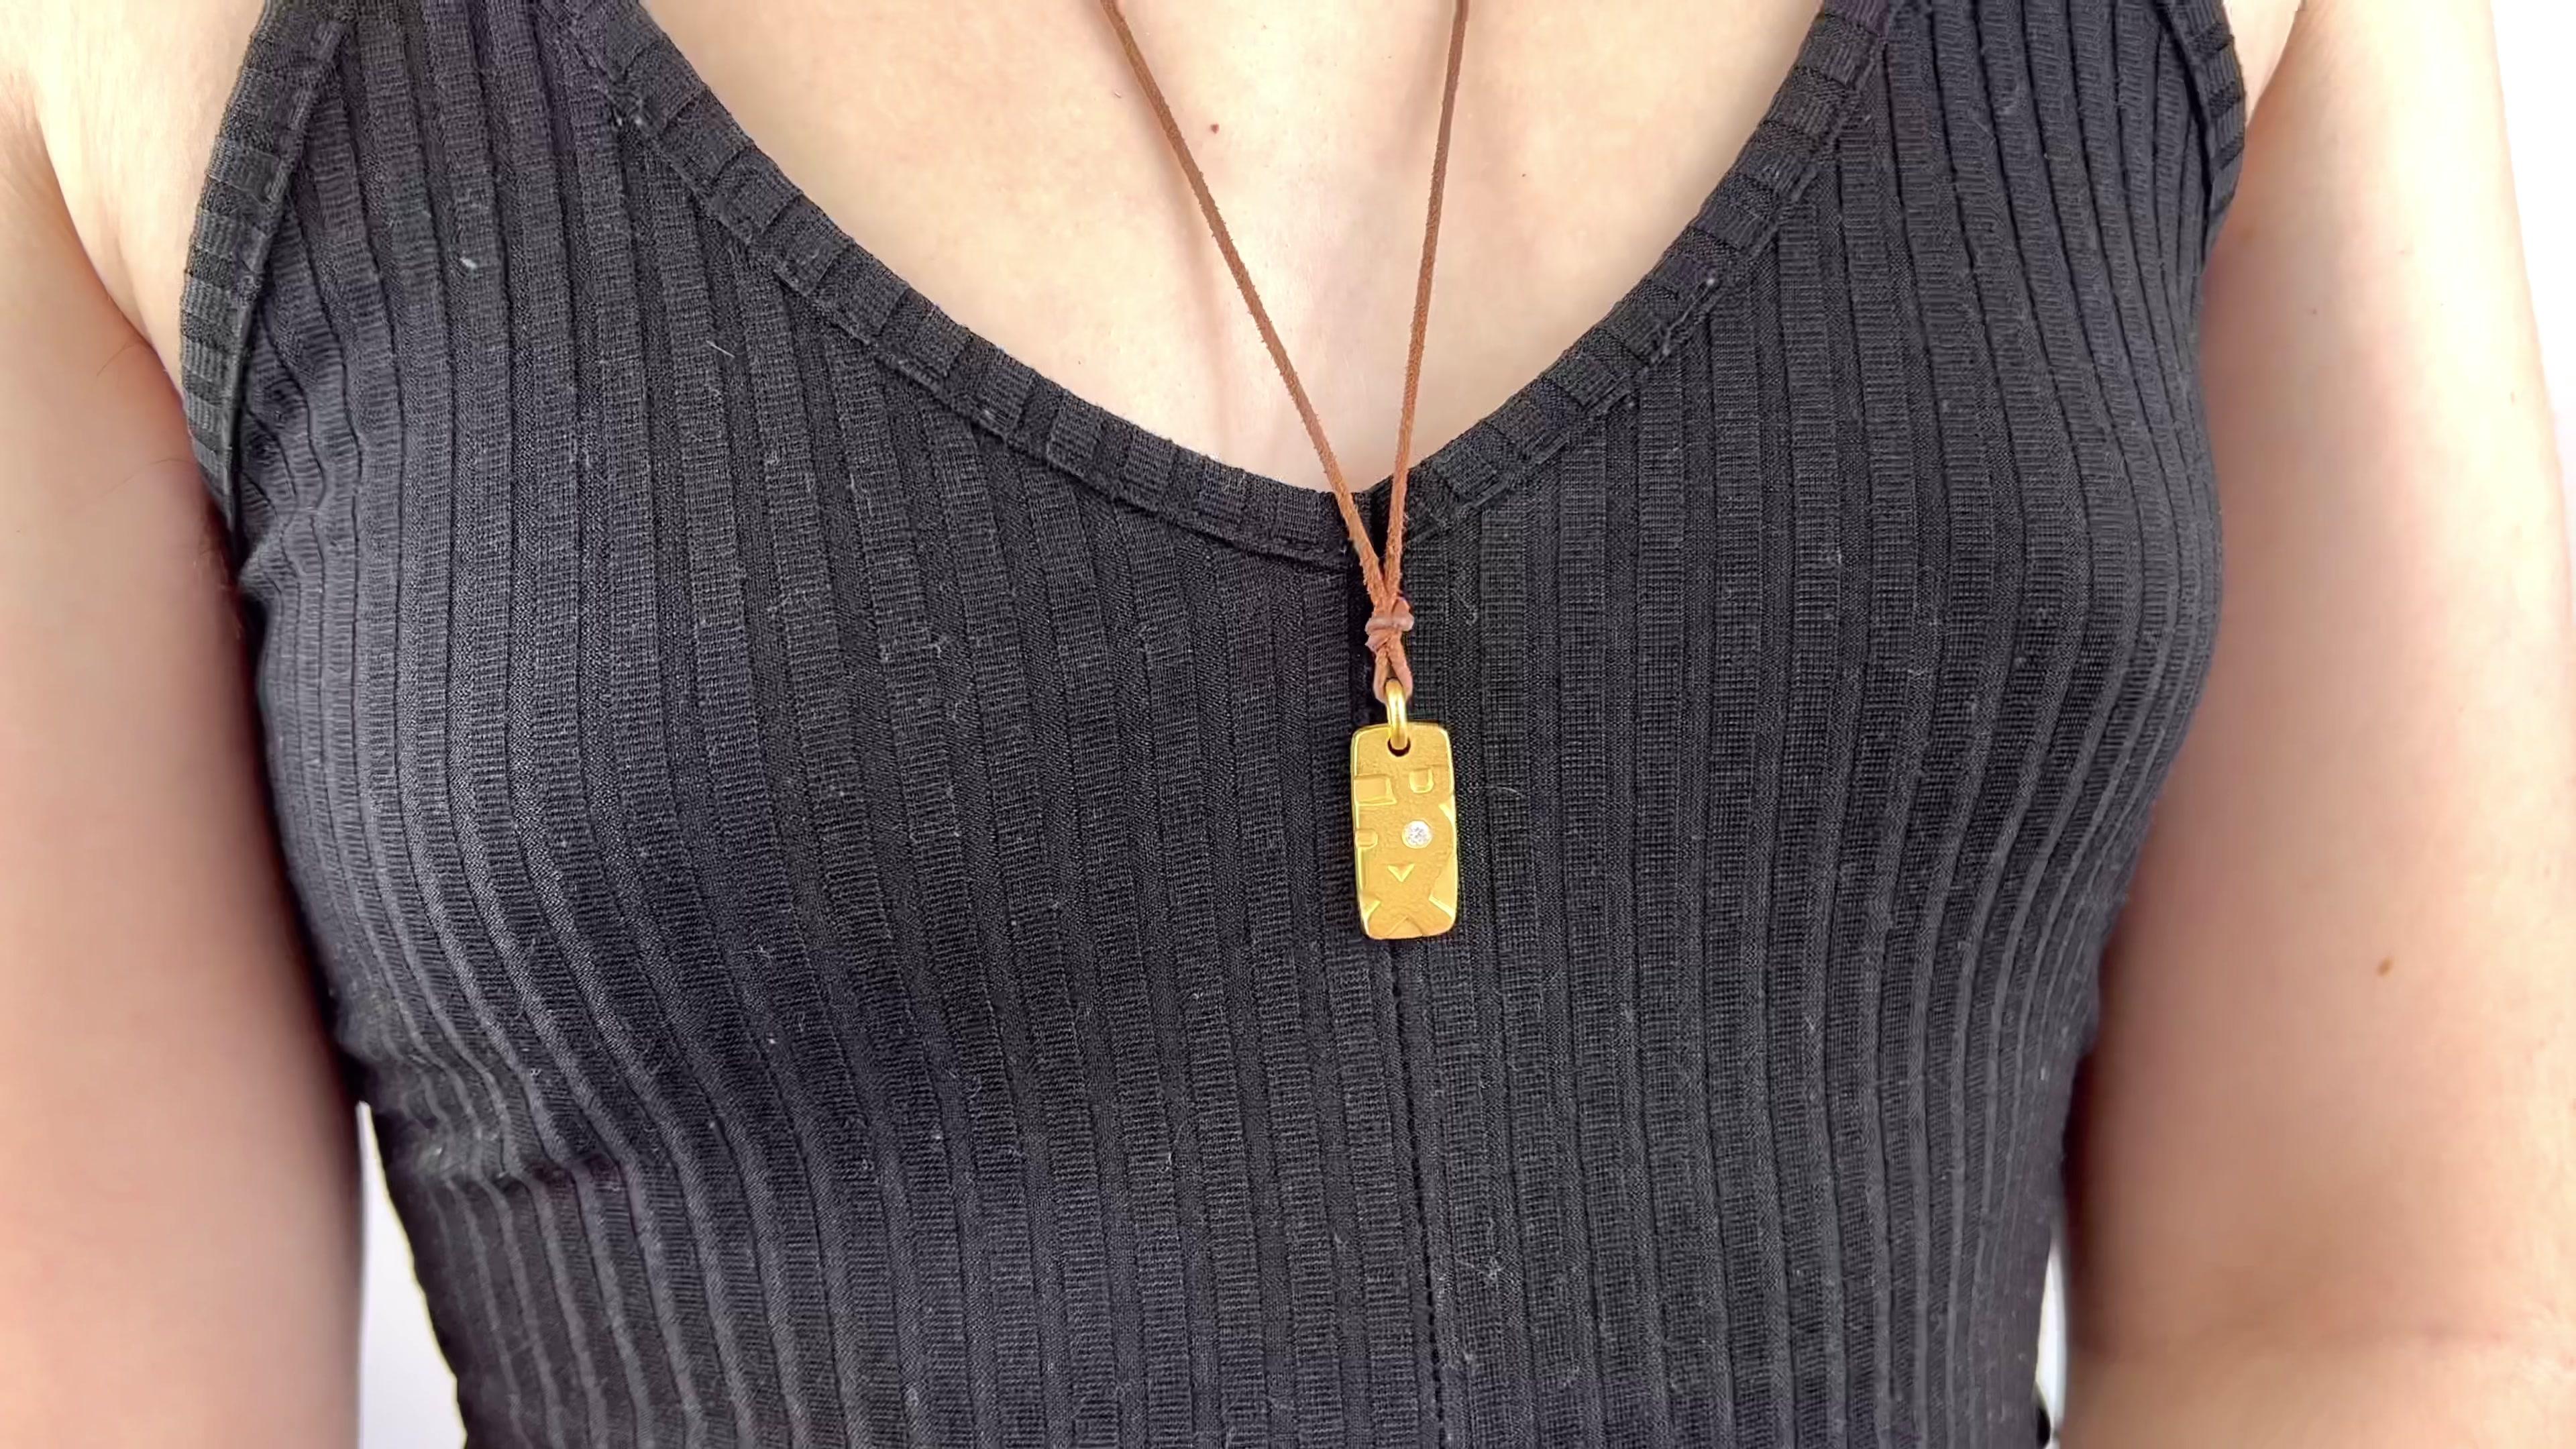 One Vintage Linda Lee Johnson Diamond 21 Karat Gold Cord Pax Necklace. Featuring one round brilliant cut diamond of approximately 0.08 carat, graded E color, VVS clarity. Crafted in 21 karat yellow gold, with Linda Lee Johnson maker's mark. Circa